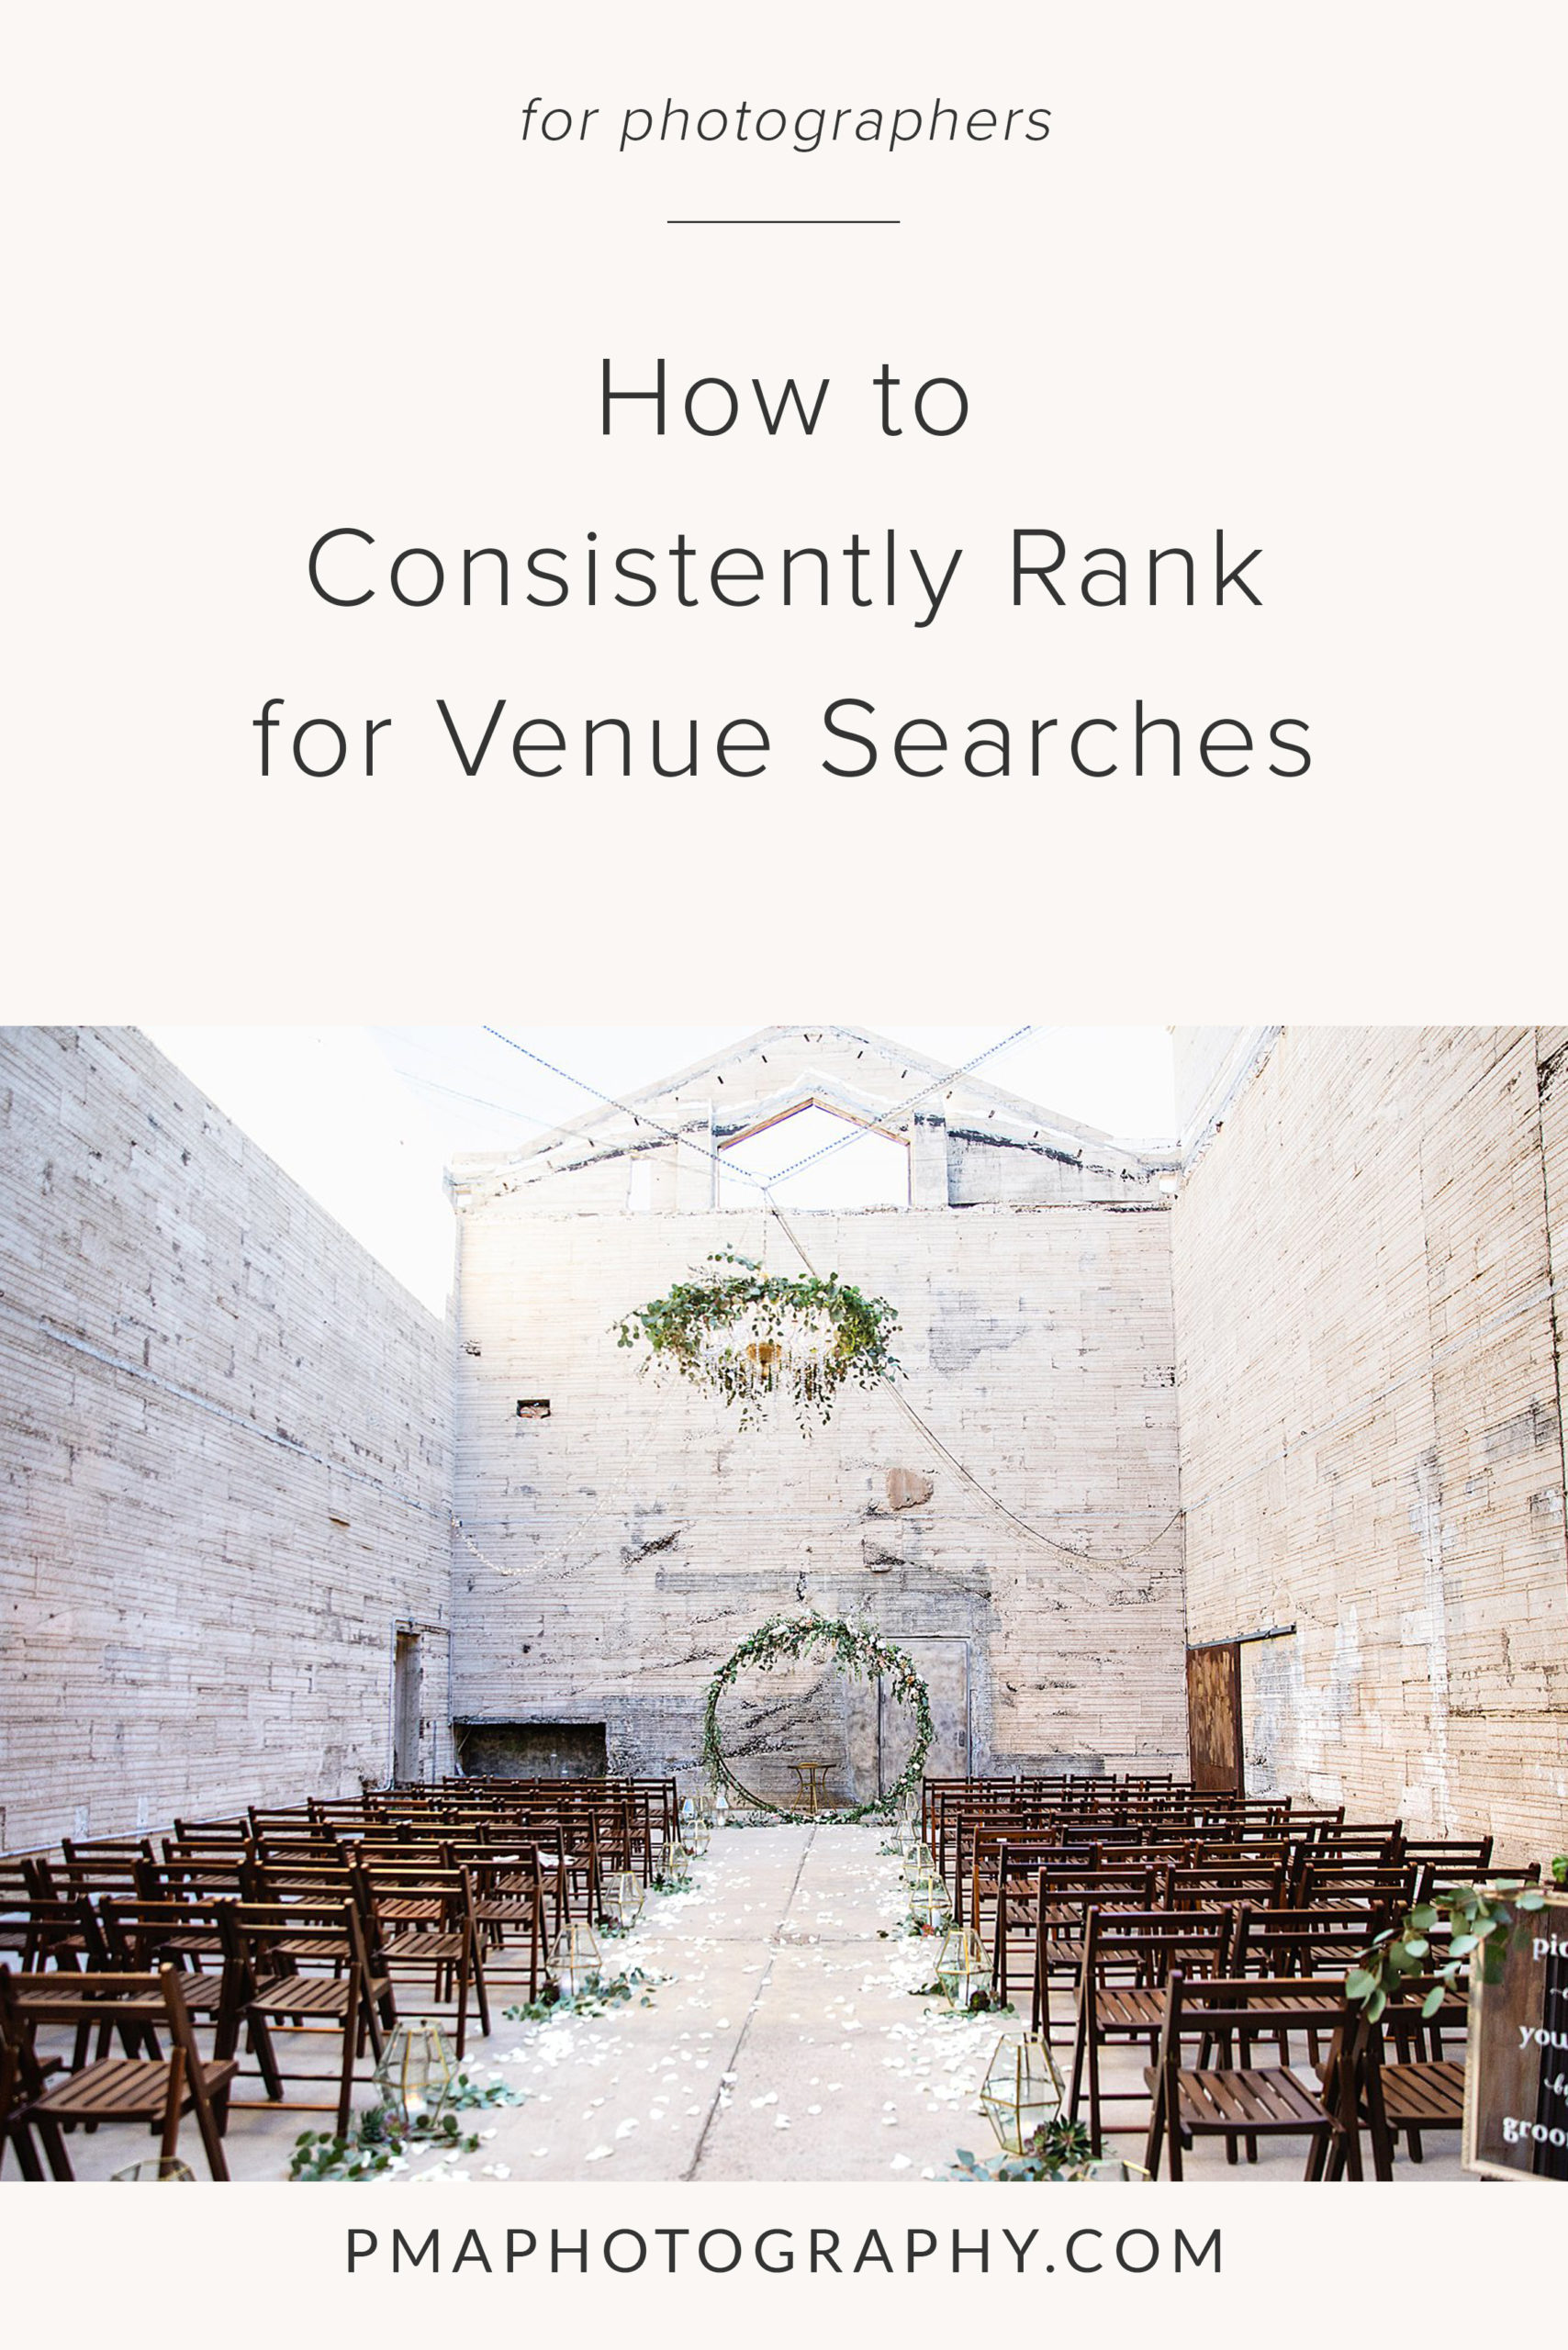 How to consistently rank for venue searches by PMA Photography.